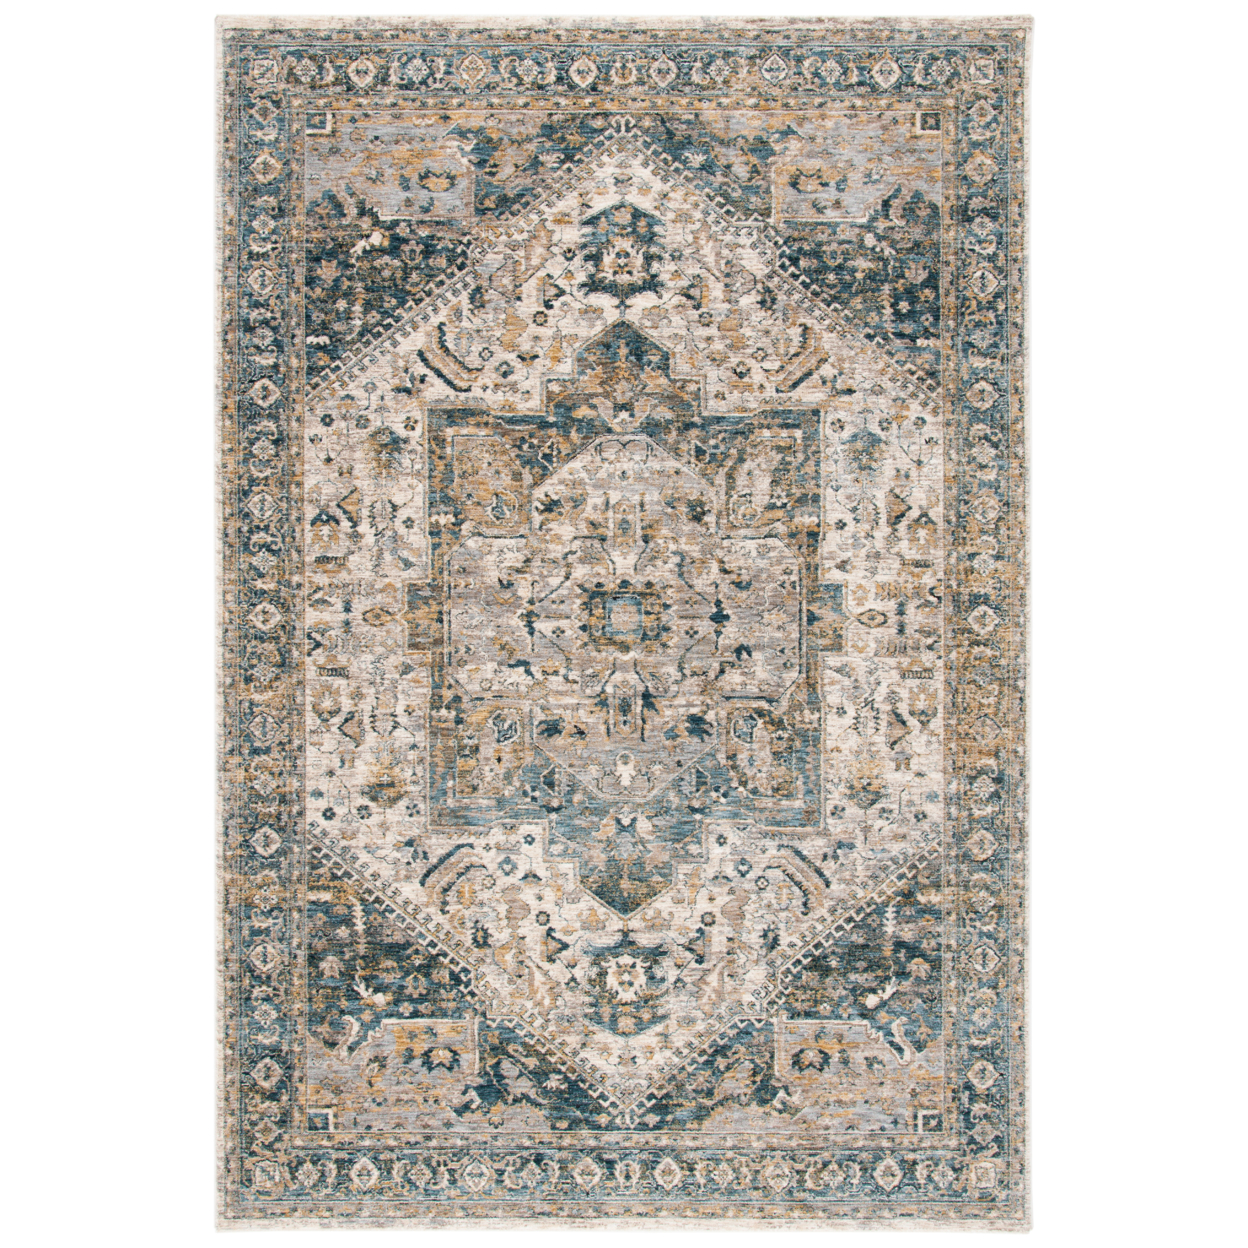 SAFAVIEH Valencia Collection VAL568A Ivory / Blue Rug - 8' X 10'